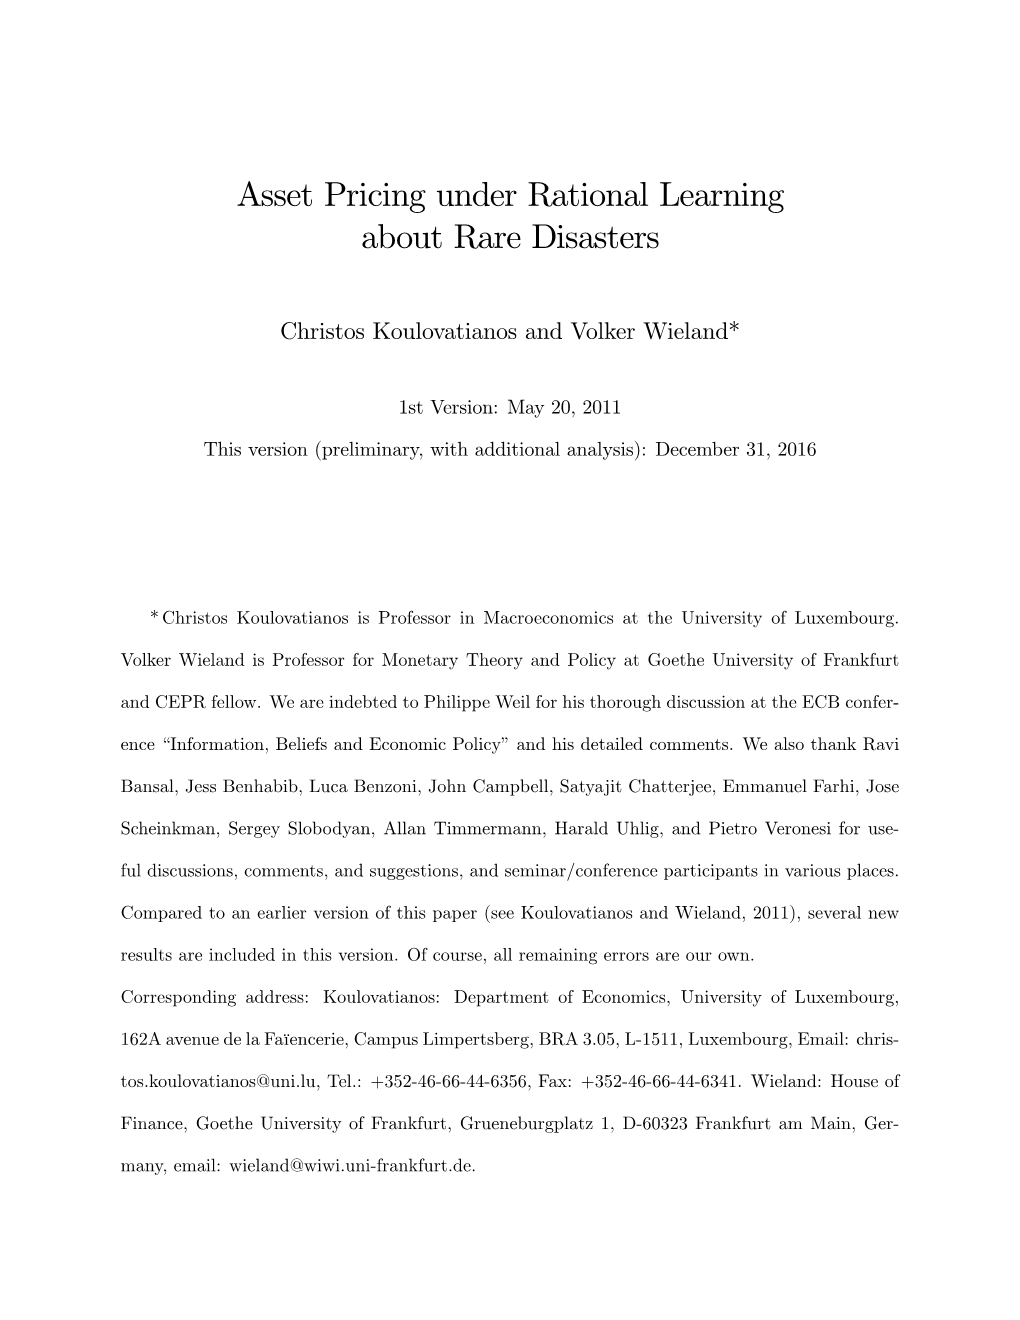 Asset Pricing Under Rational Learning About Rare Disasters